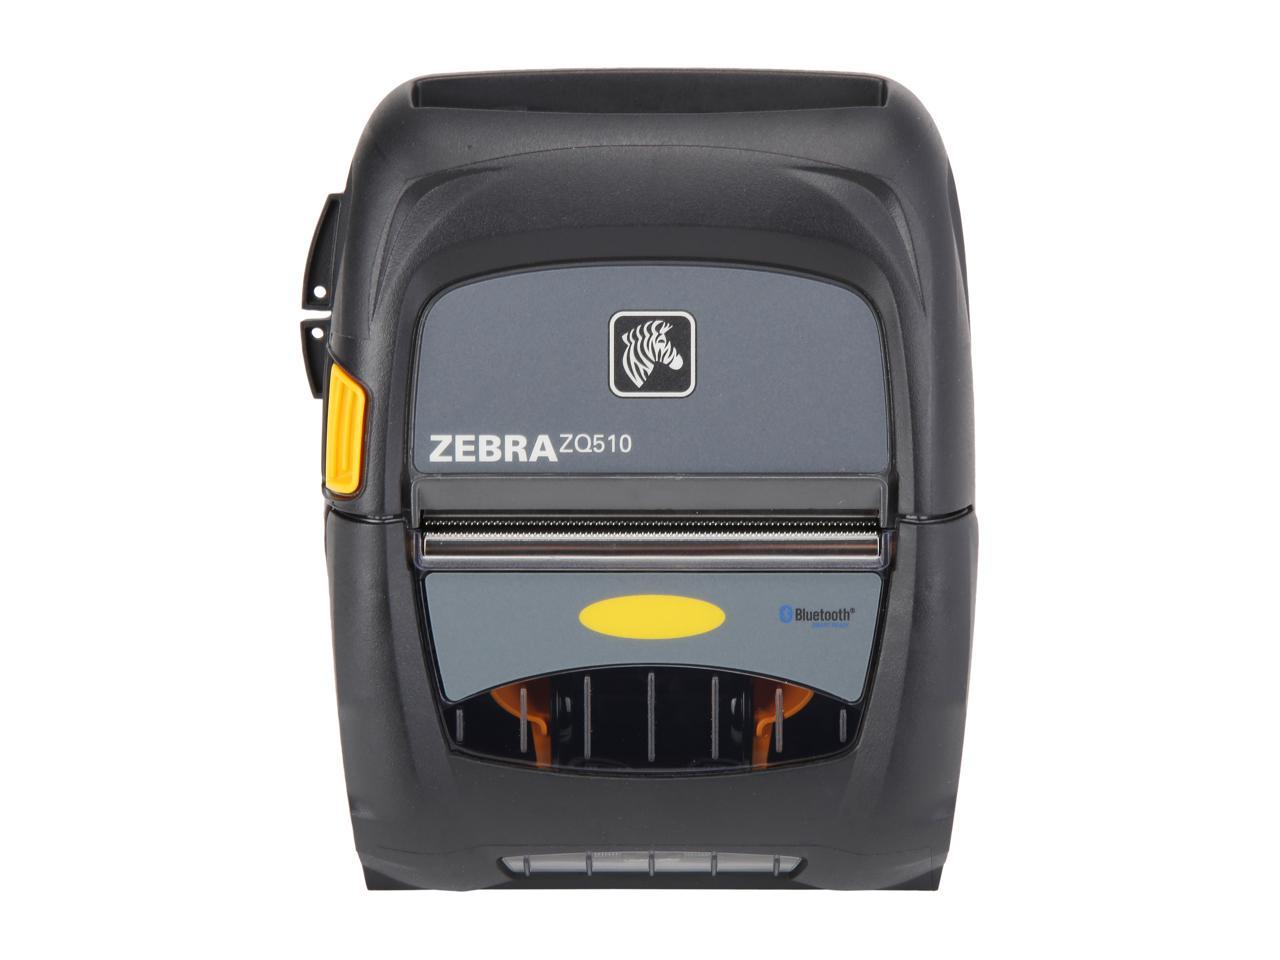 Zebra Zq510 3 Mobile Direct Thermal Receipt And Label Printer 203 Dpi Bluetooth 40 Linered 7389